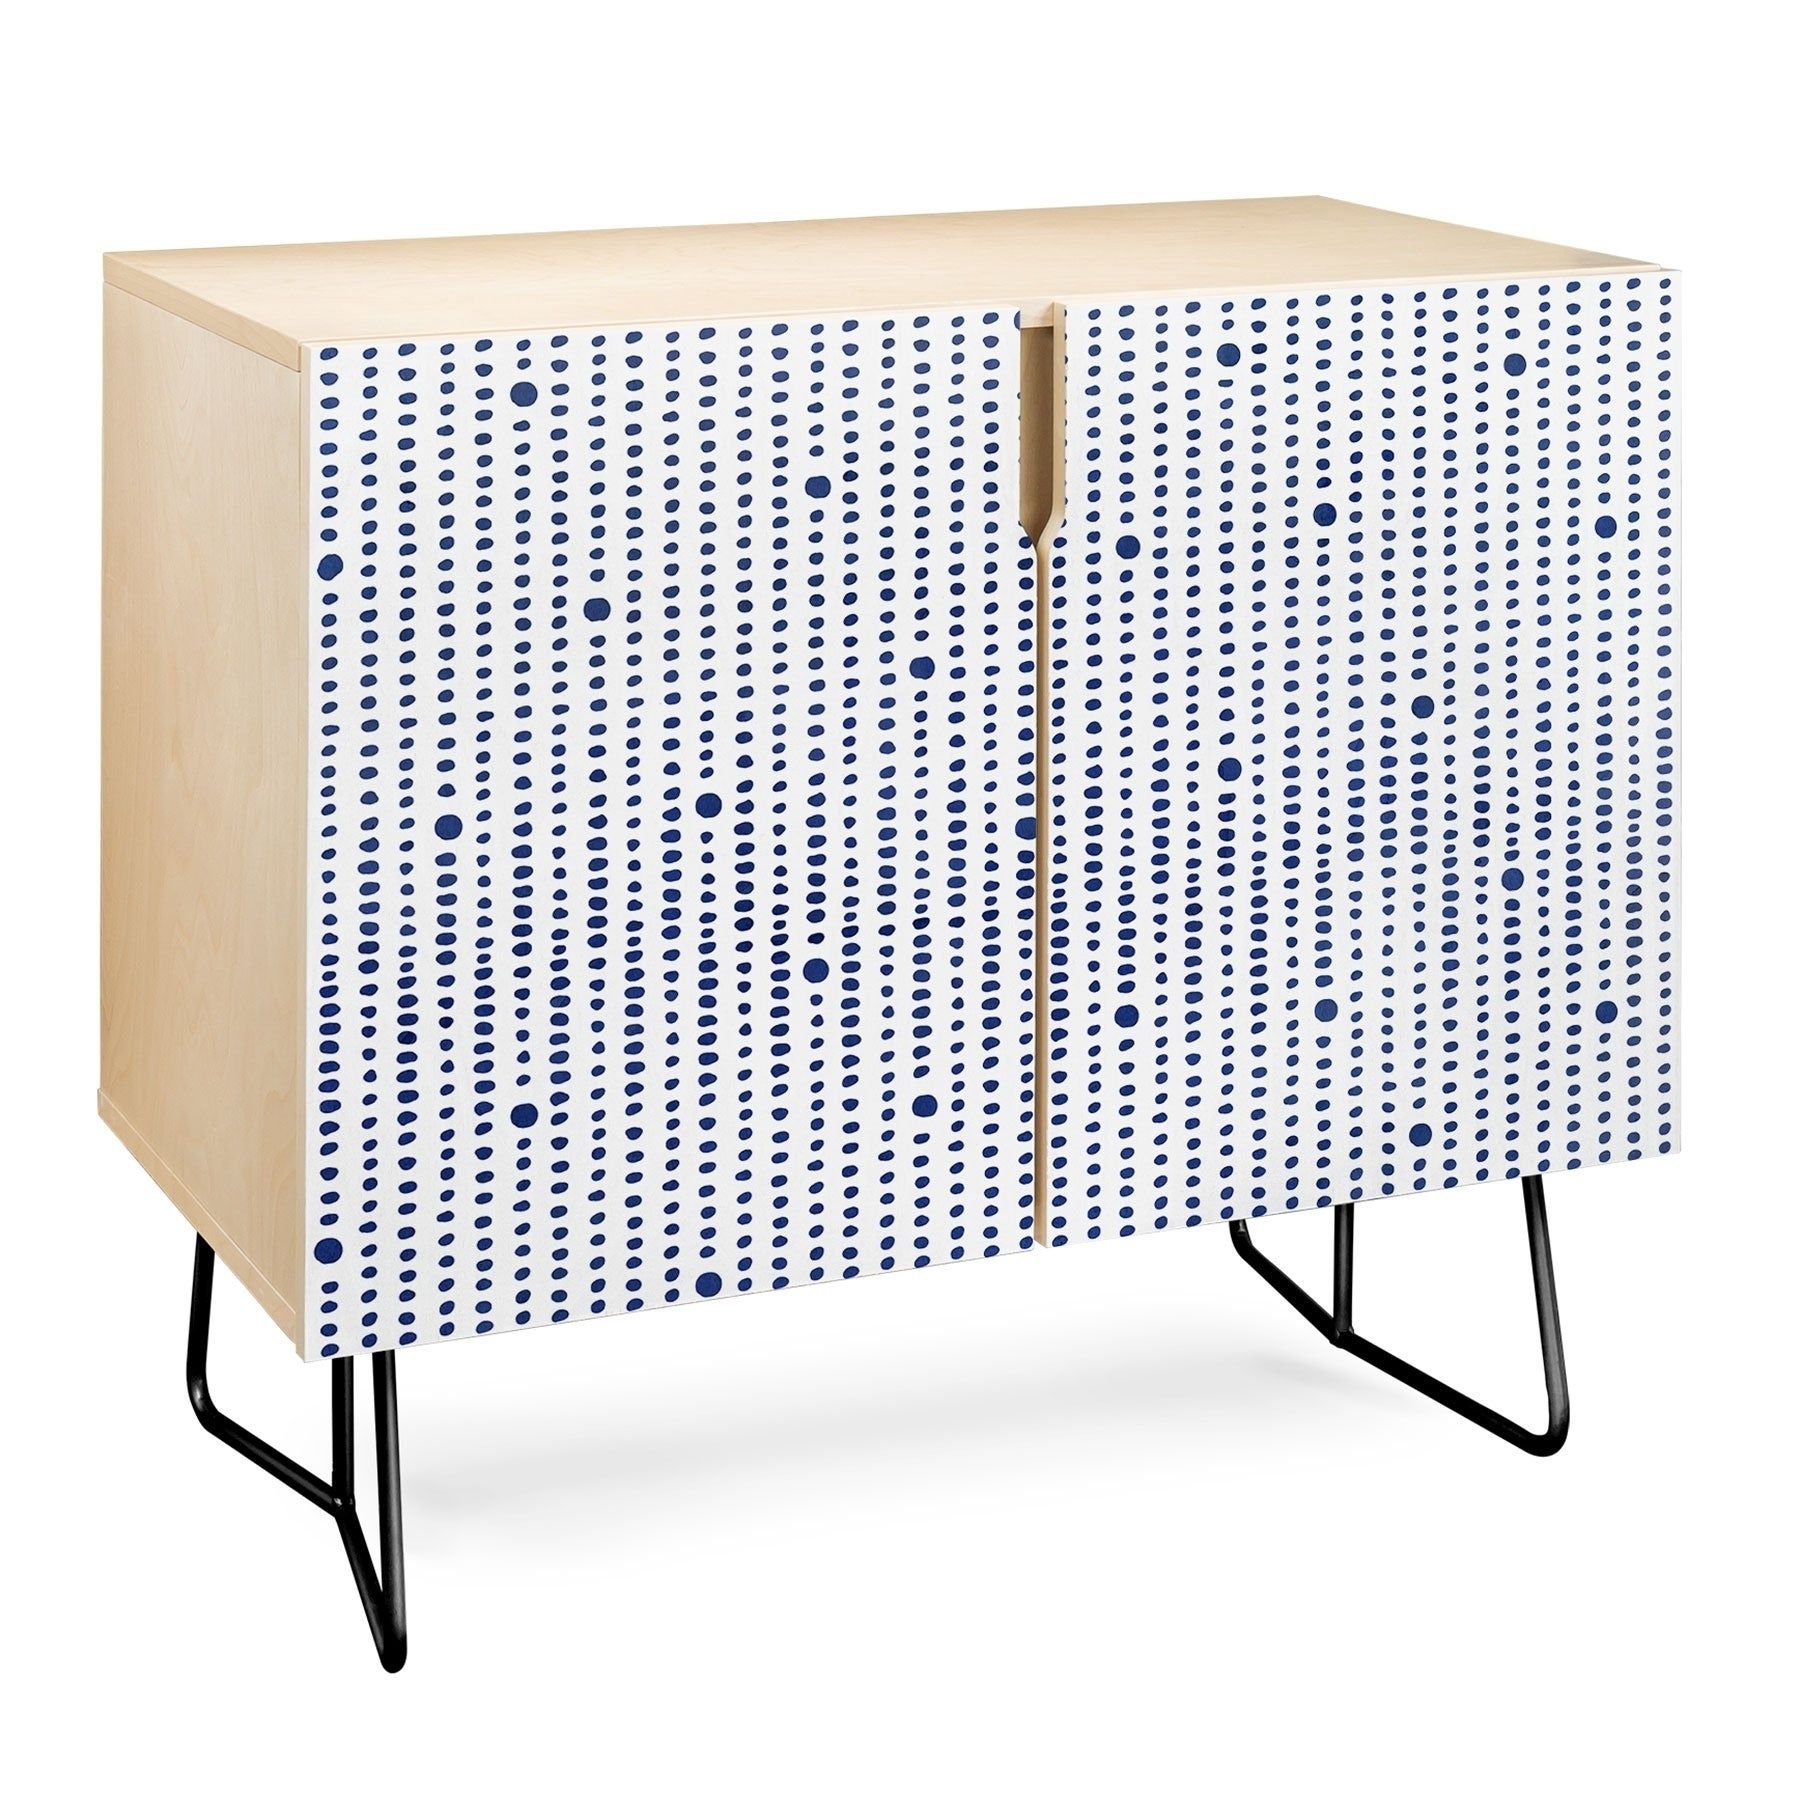 Deny Designs Japandi Style Credenza (birch Or Walnut, 2 Leg Options) Throughout Strokes And Waves Credenzas (View 11 of 30)